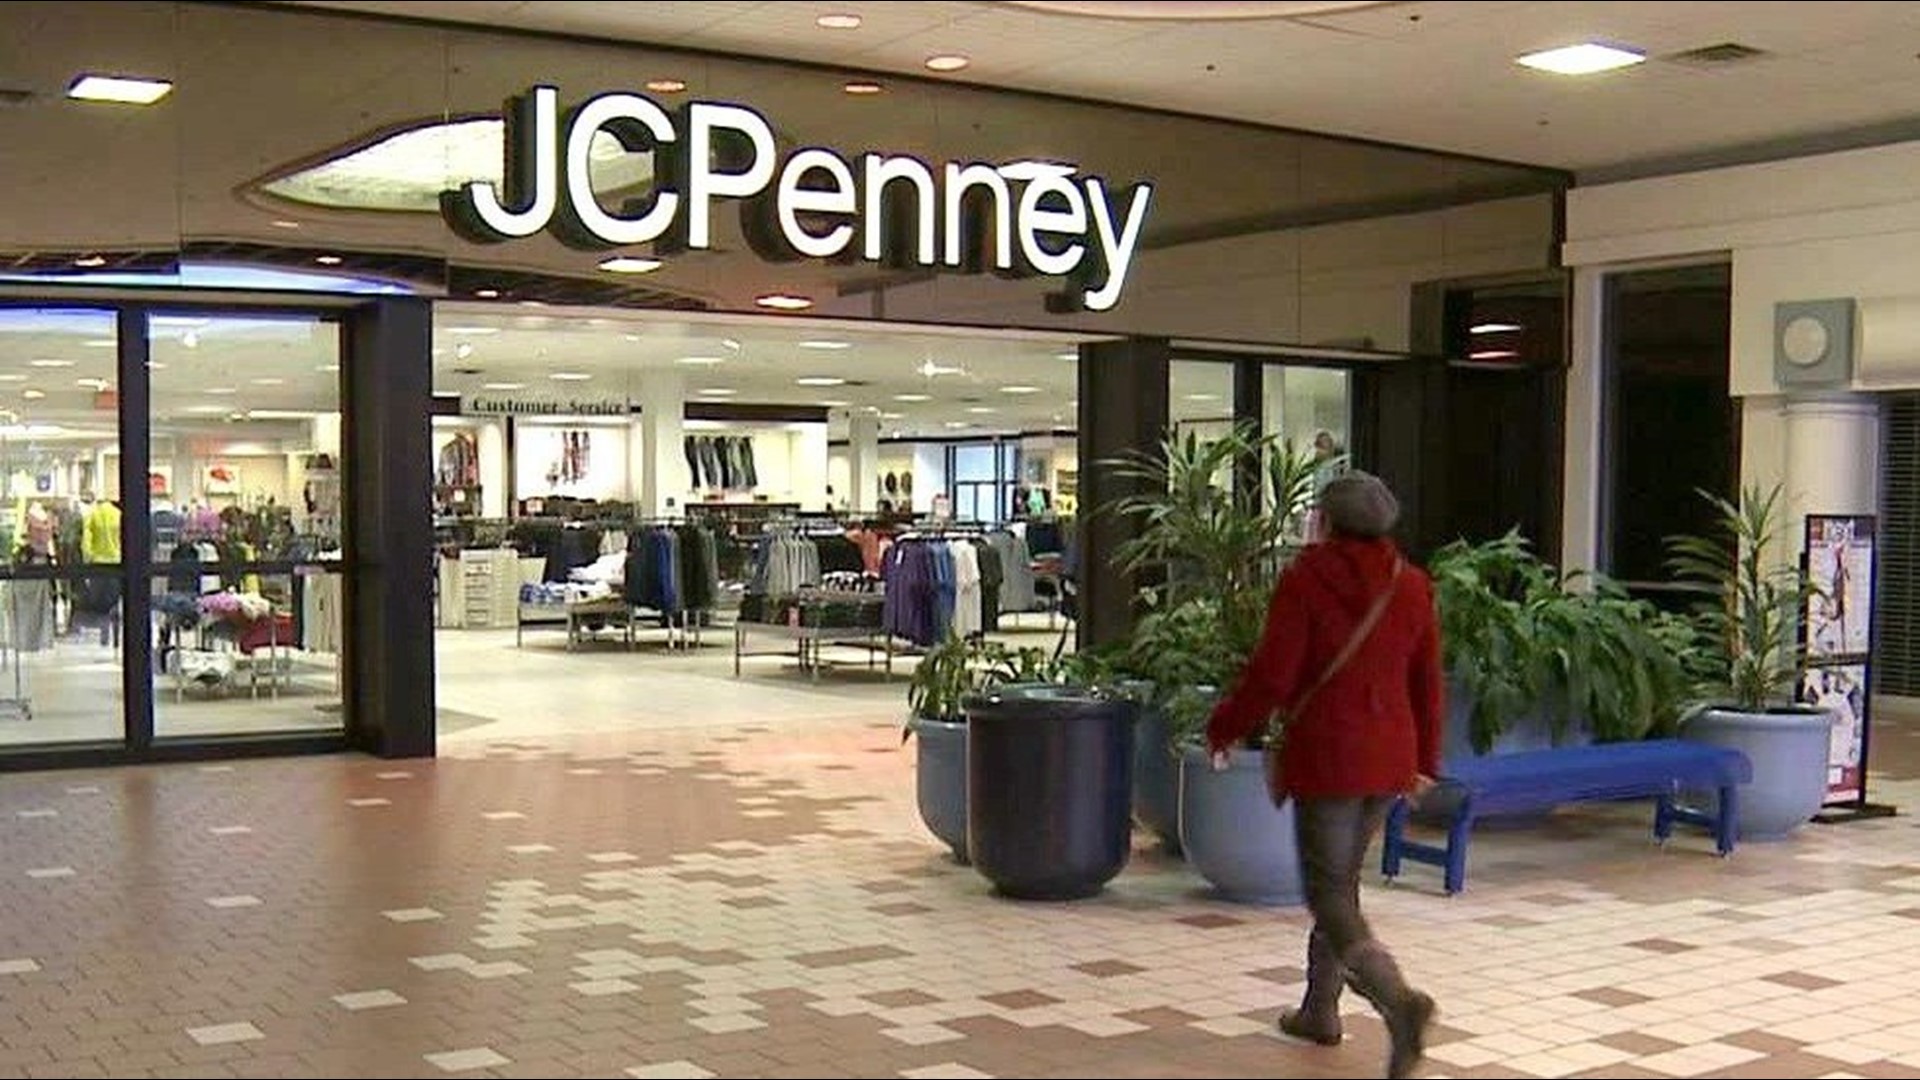 Jcpenney To Close Up To 140 Stores Two Distribution Centers